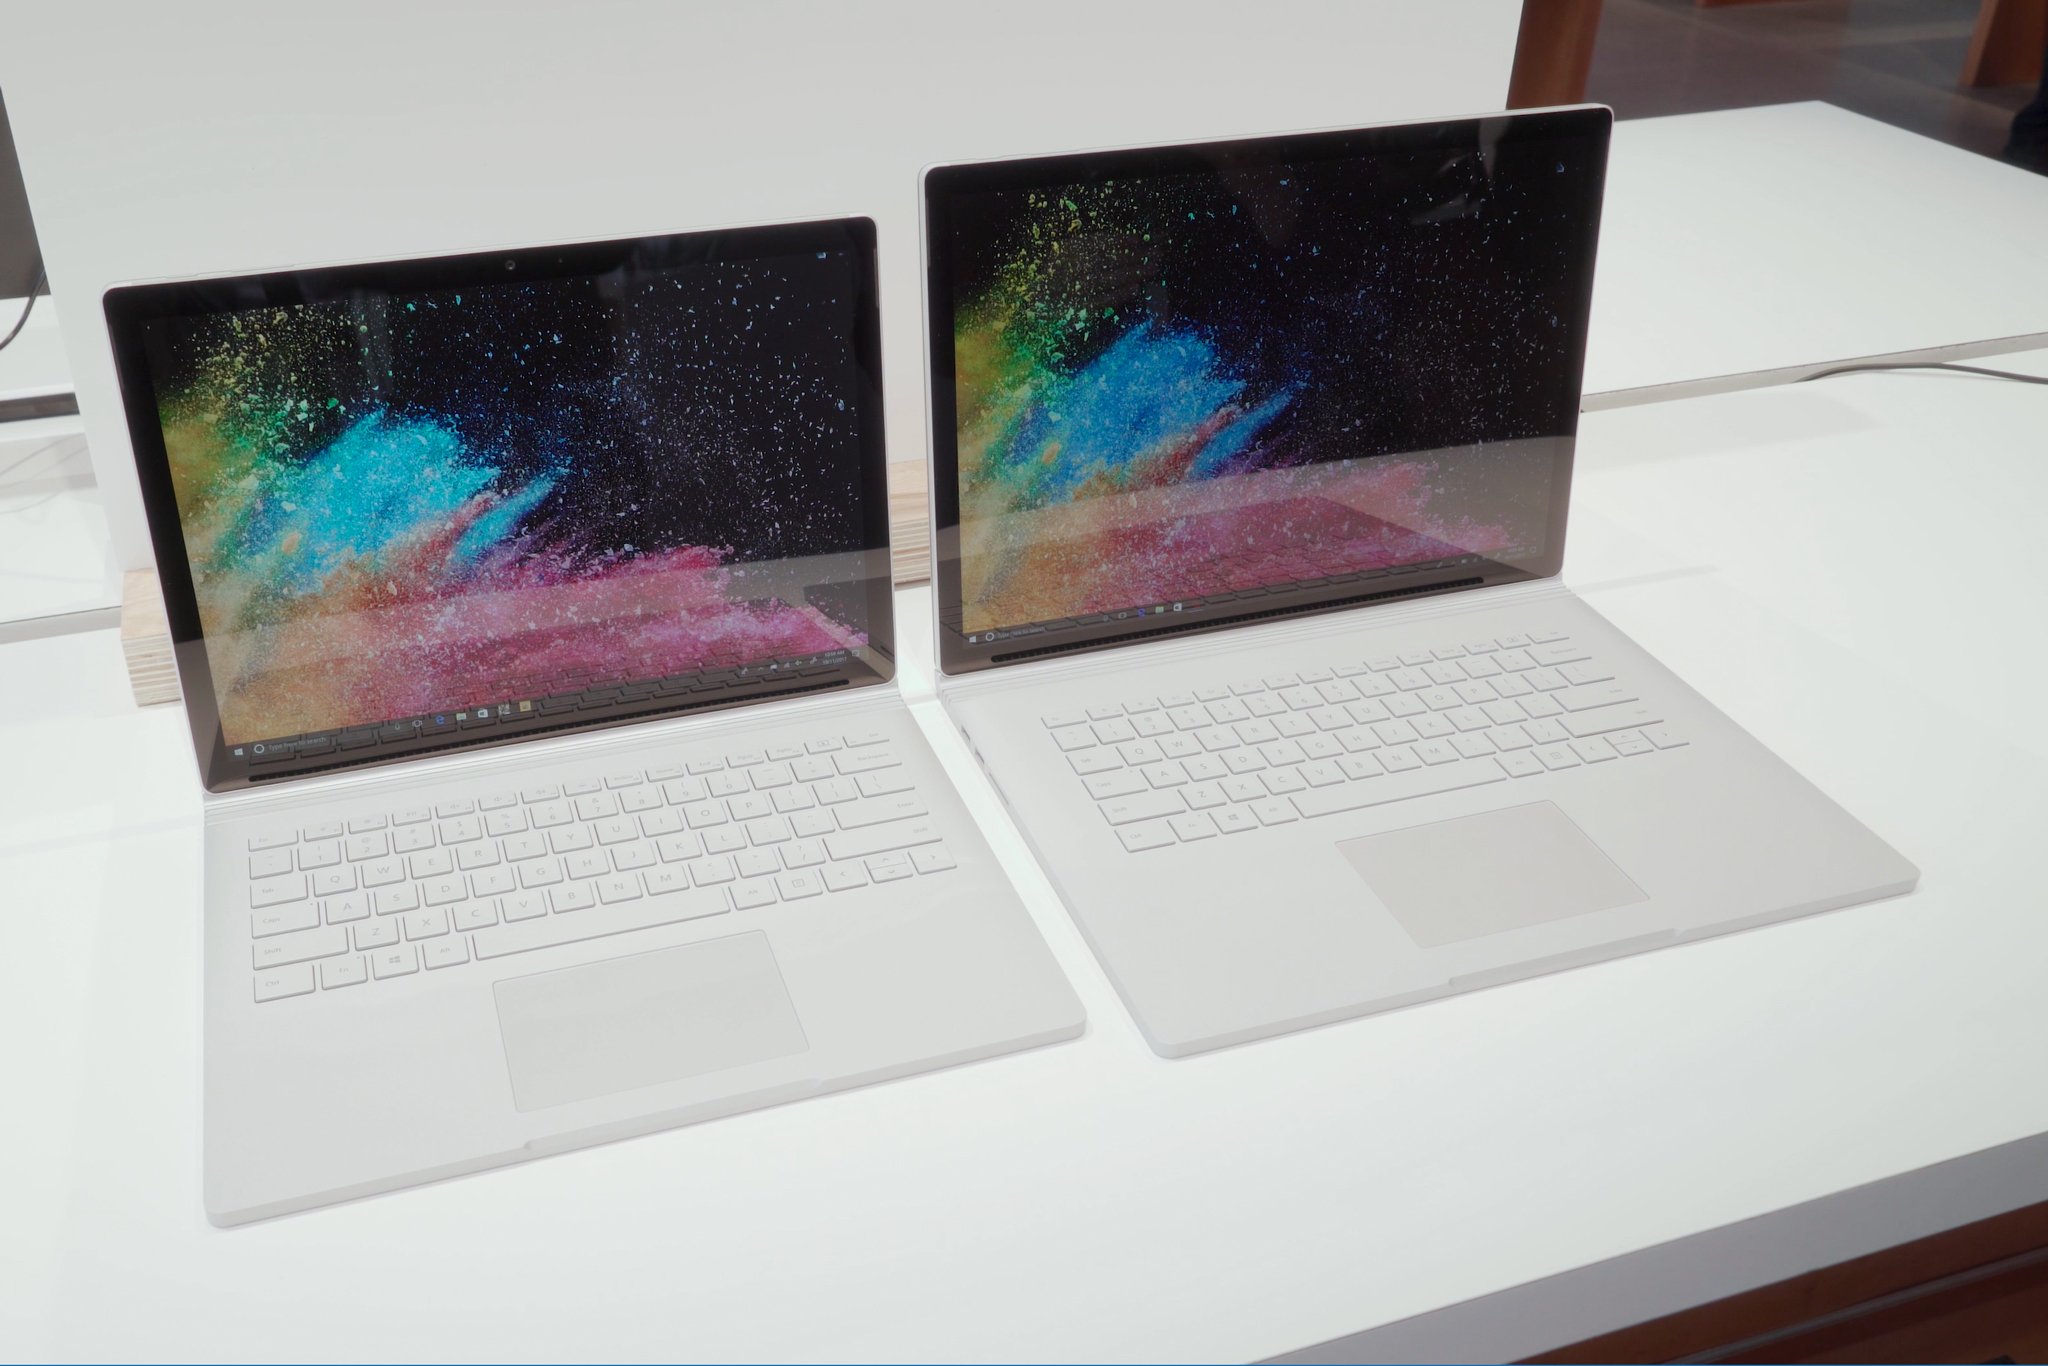 Microsoft Surface Book 2 comes in two sizes, packs NVIDIA graphics 